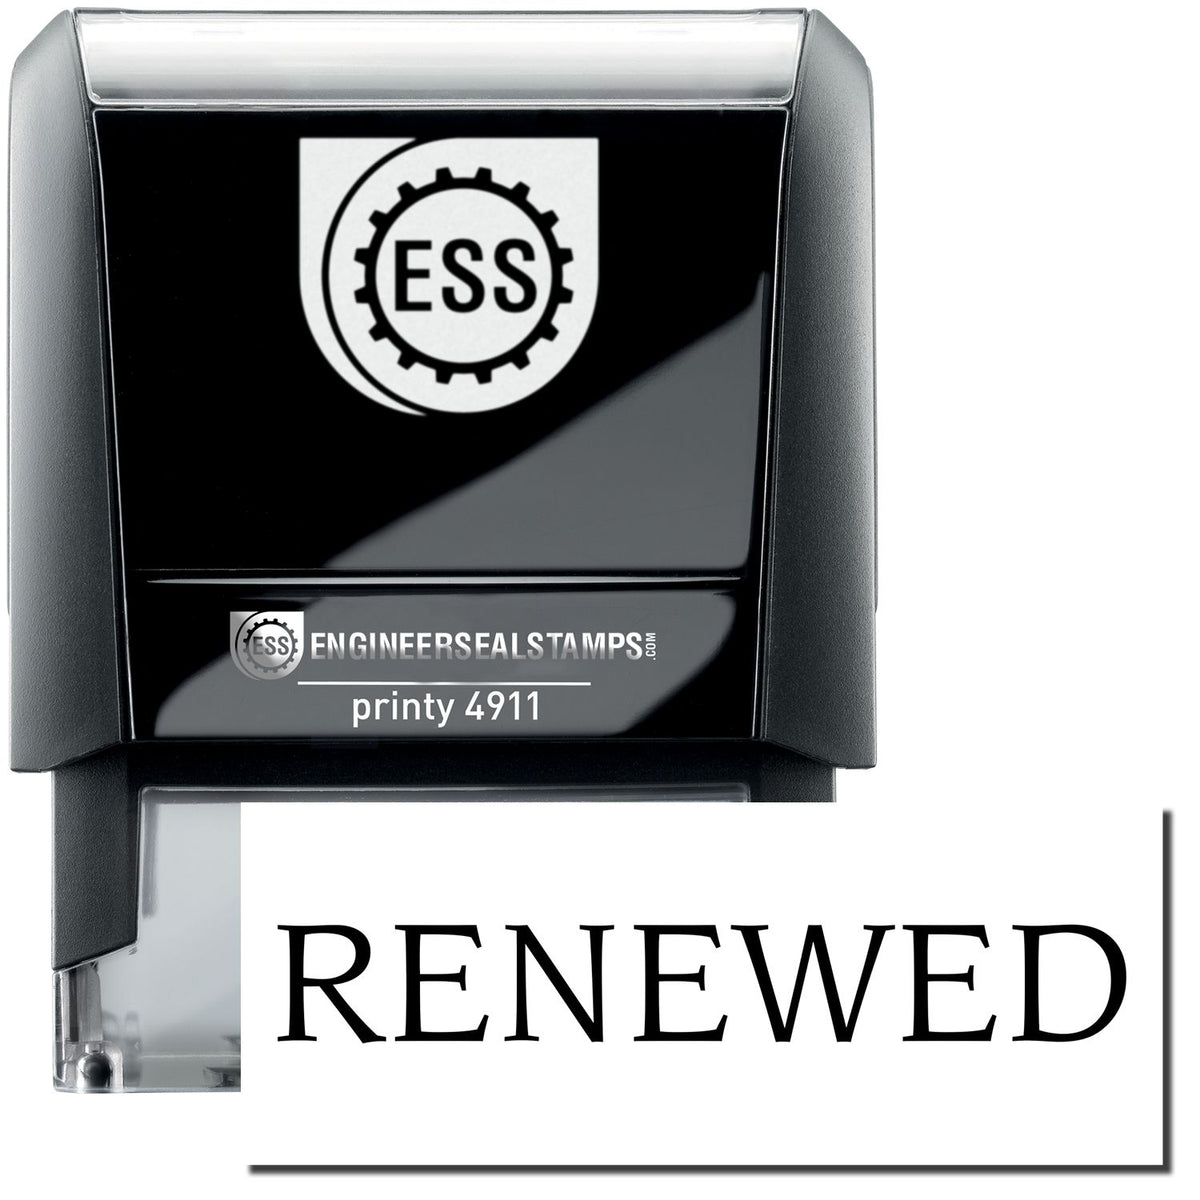 A self-inking stamp with a stamped image showing how the text &quot;RENEWED&quot; is displayed after stamping.